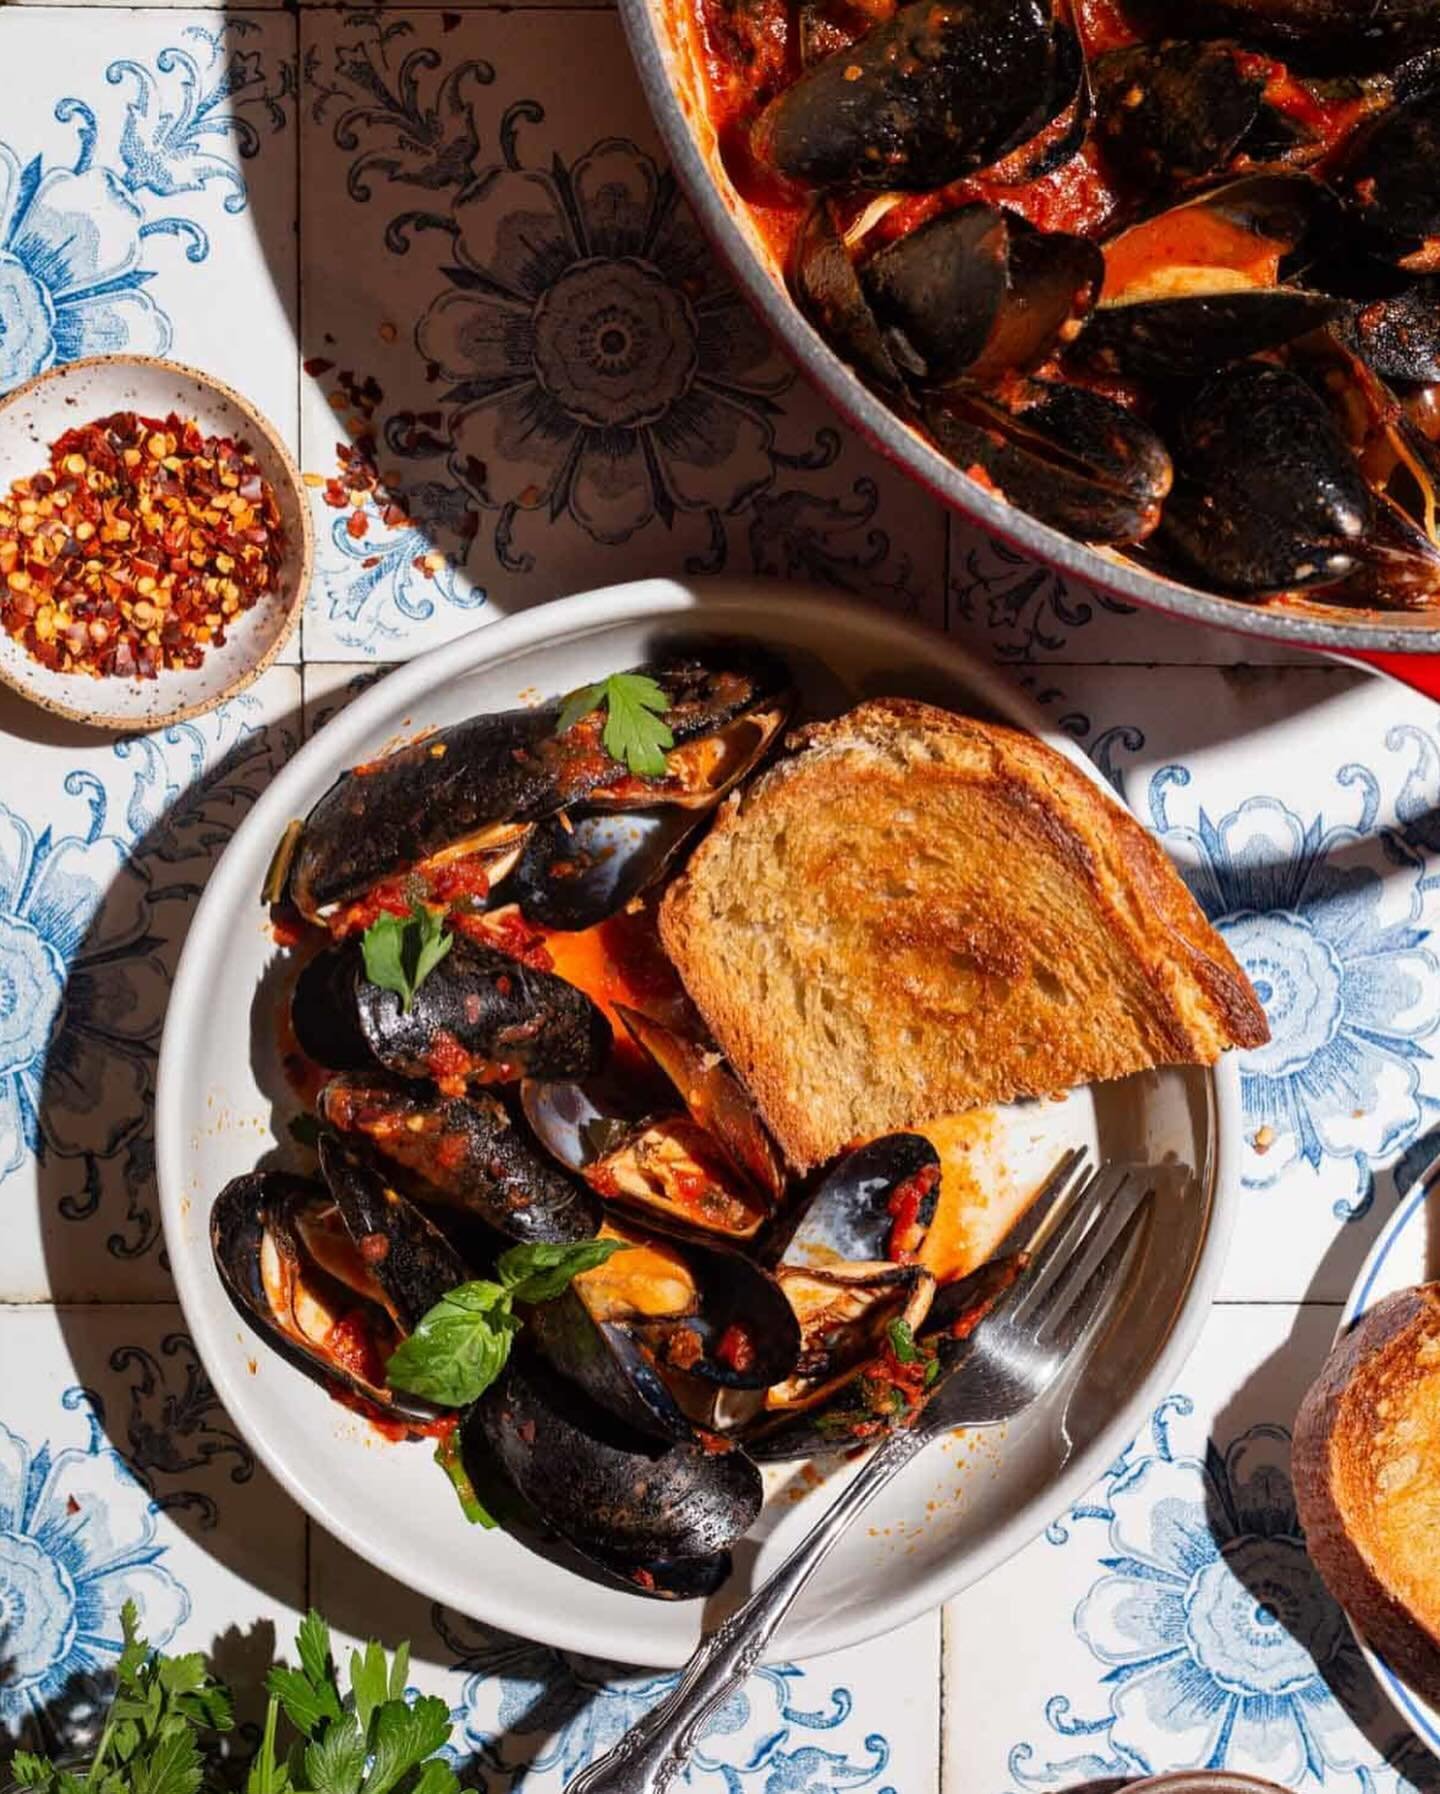 MUSSELS MARINARA ❤️🖤💪
Sounds like a character from the tv show Jersey Shore* but no ~ it&rsquo;s a zesty seafood dish that combines fresh mussels, garlic, wine, hot pepper 🌶️ and, in the American rendition, tomatoes. So good with grilled bread for